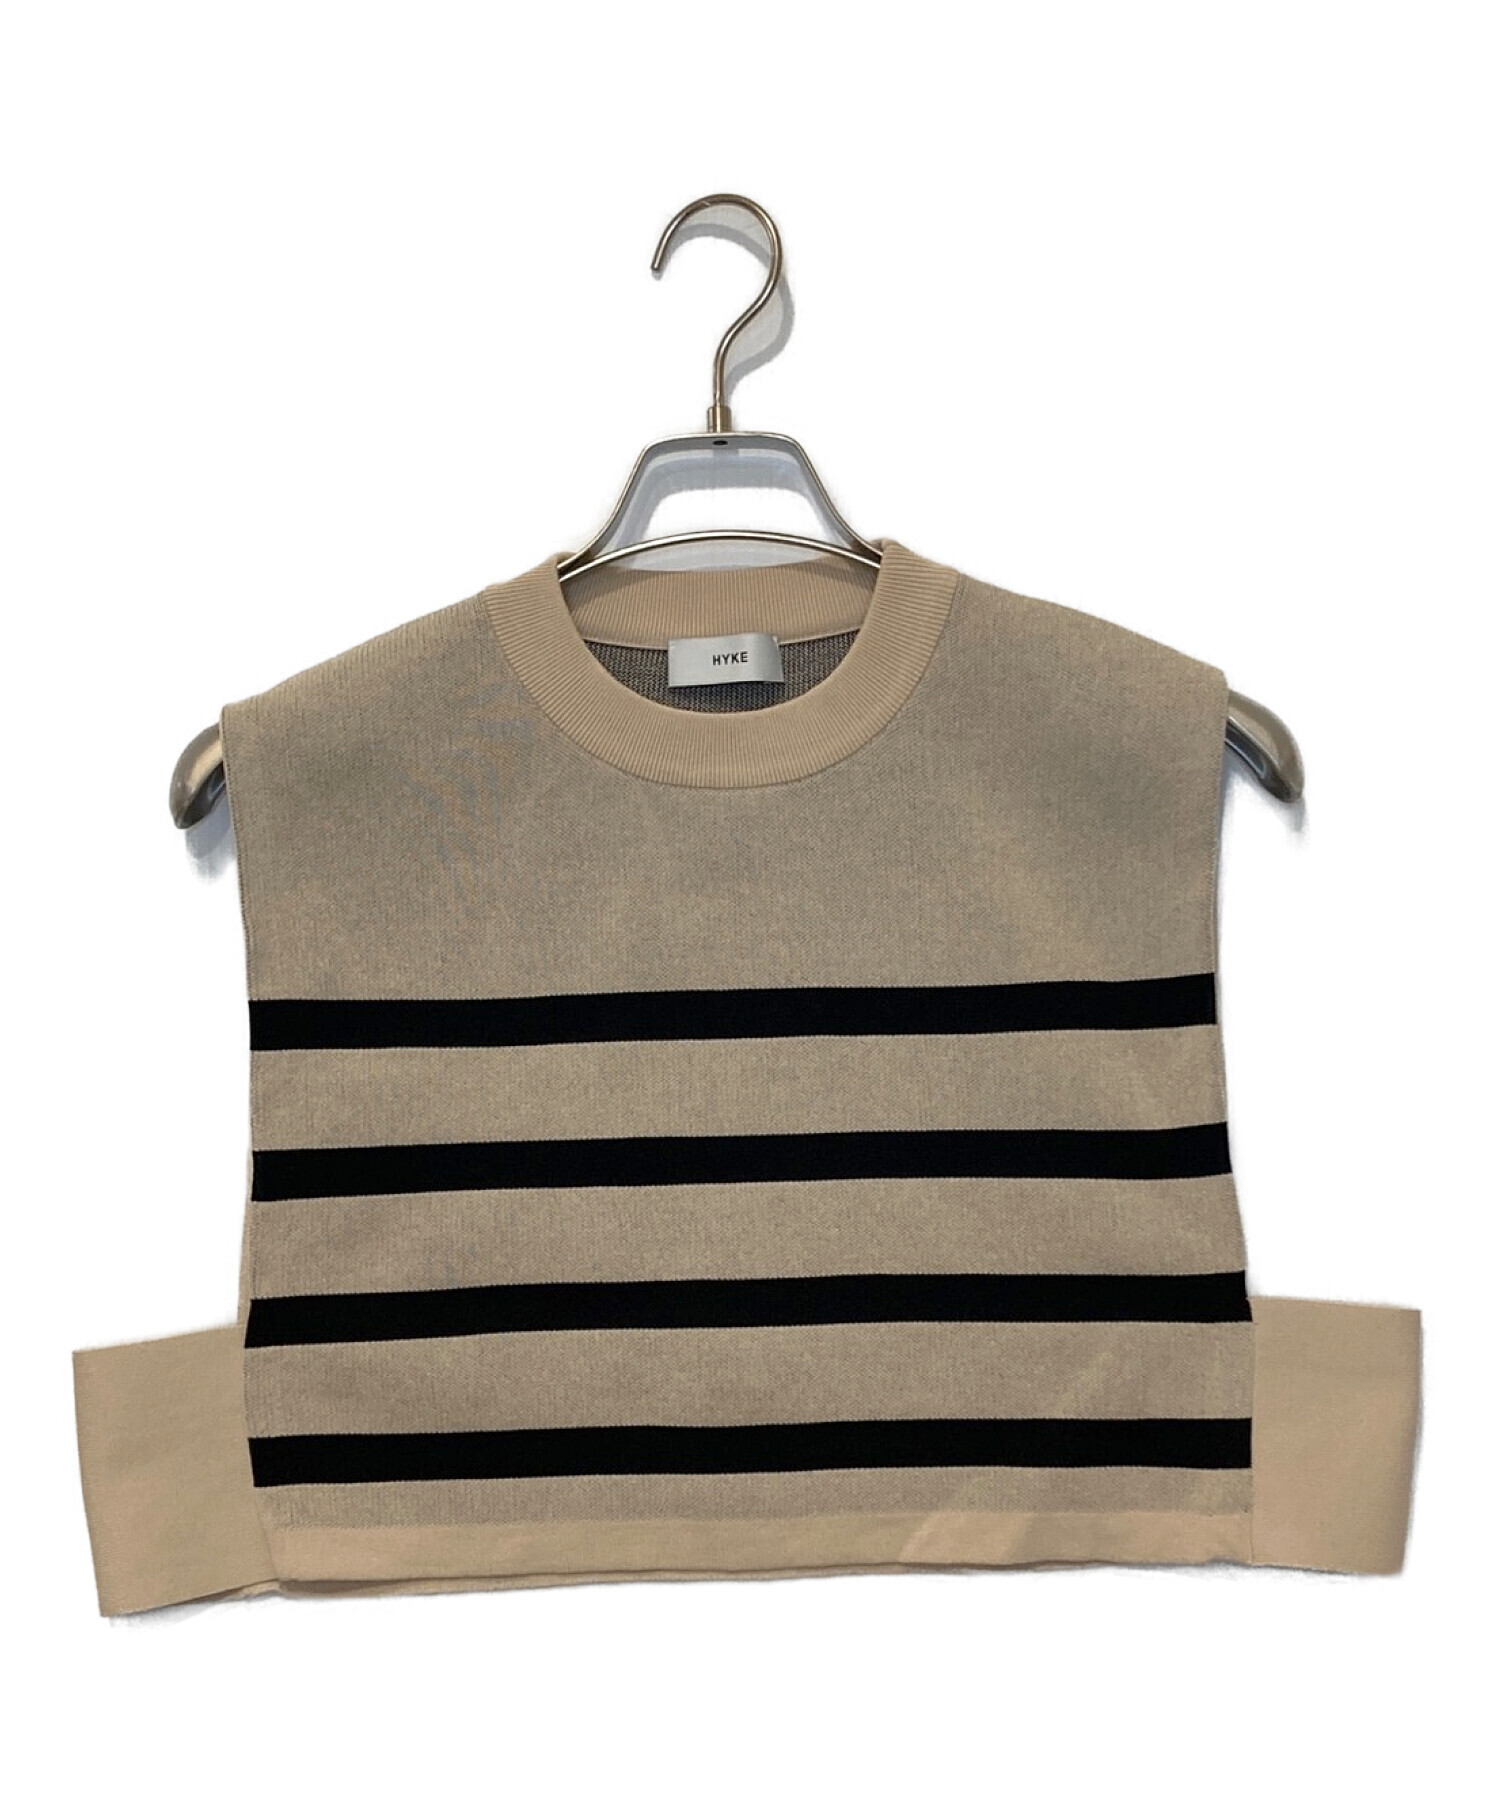 HYKE STRIPED SWEATER CROPPED TOP